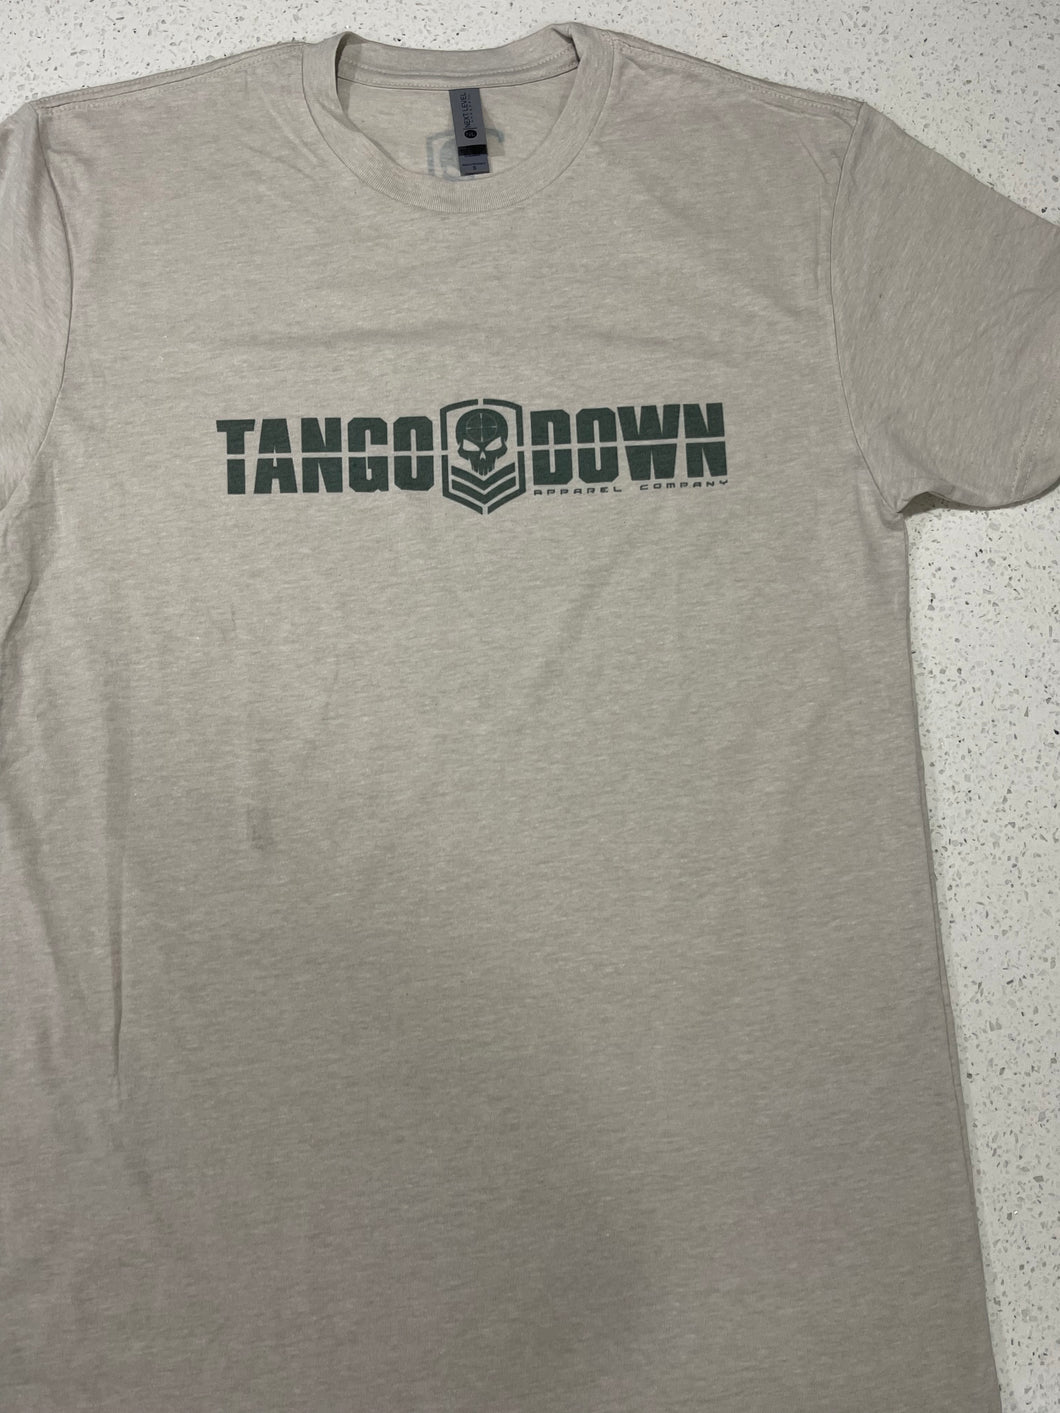 Tango Down T's Athletic Fit (Sand)